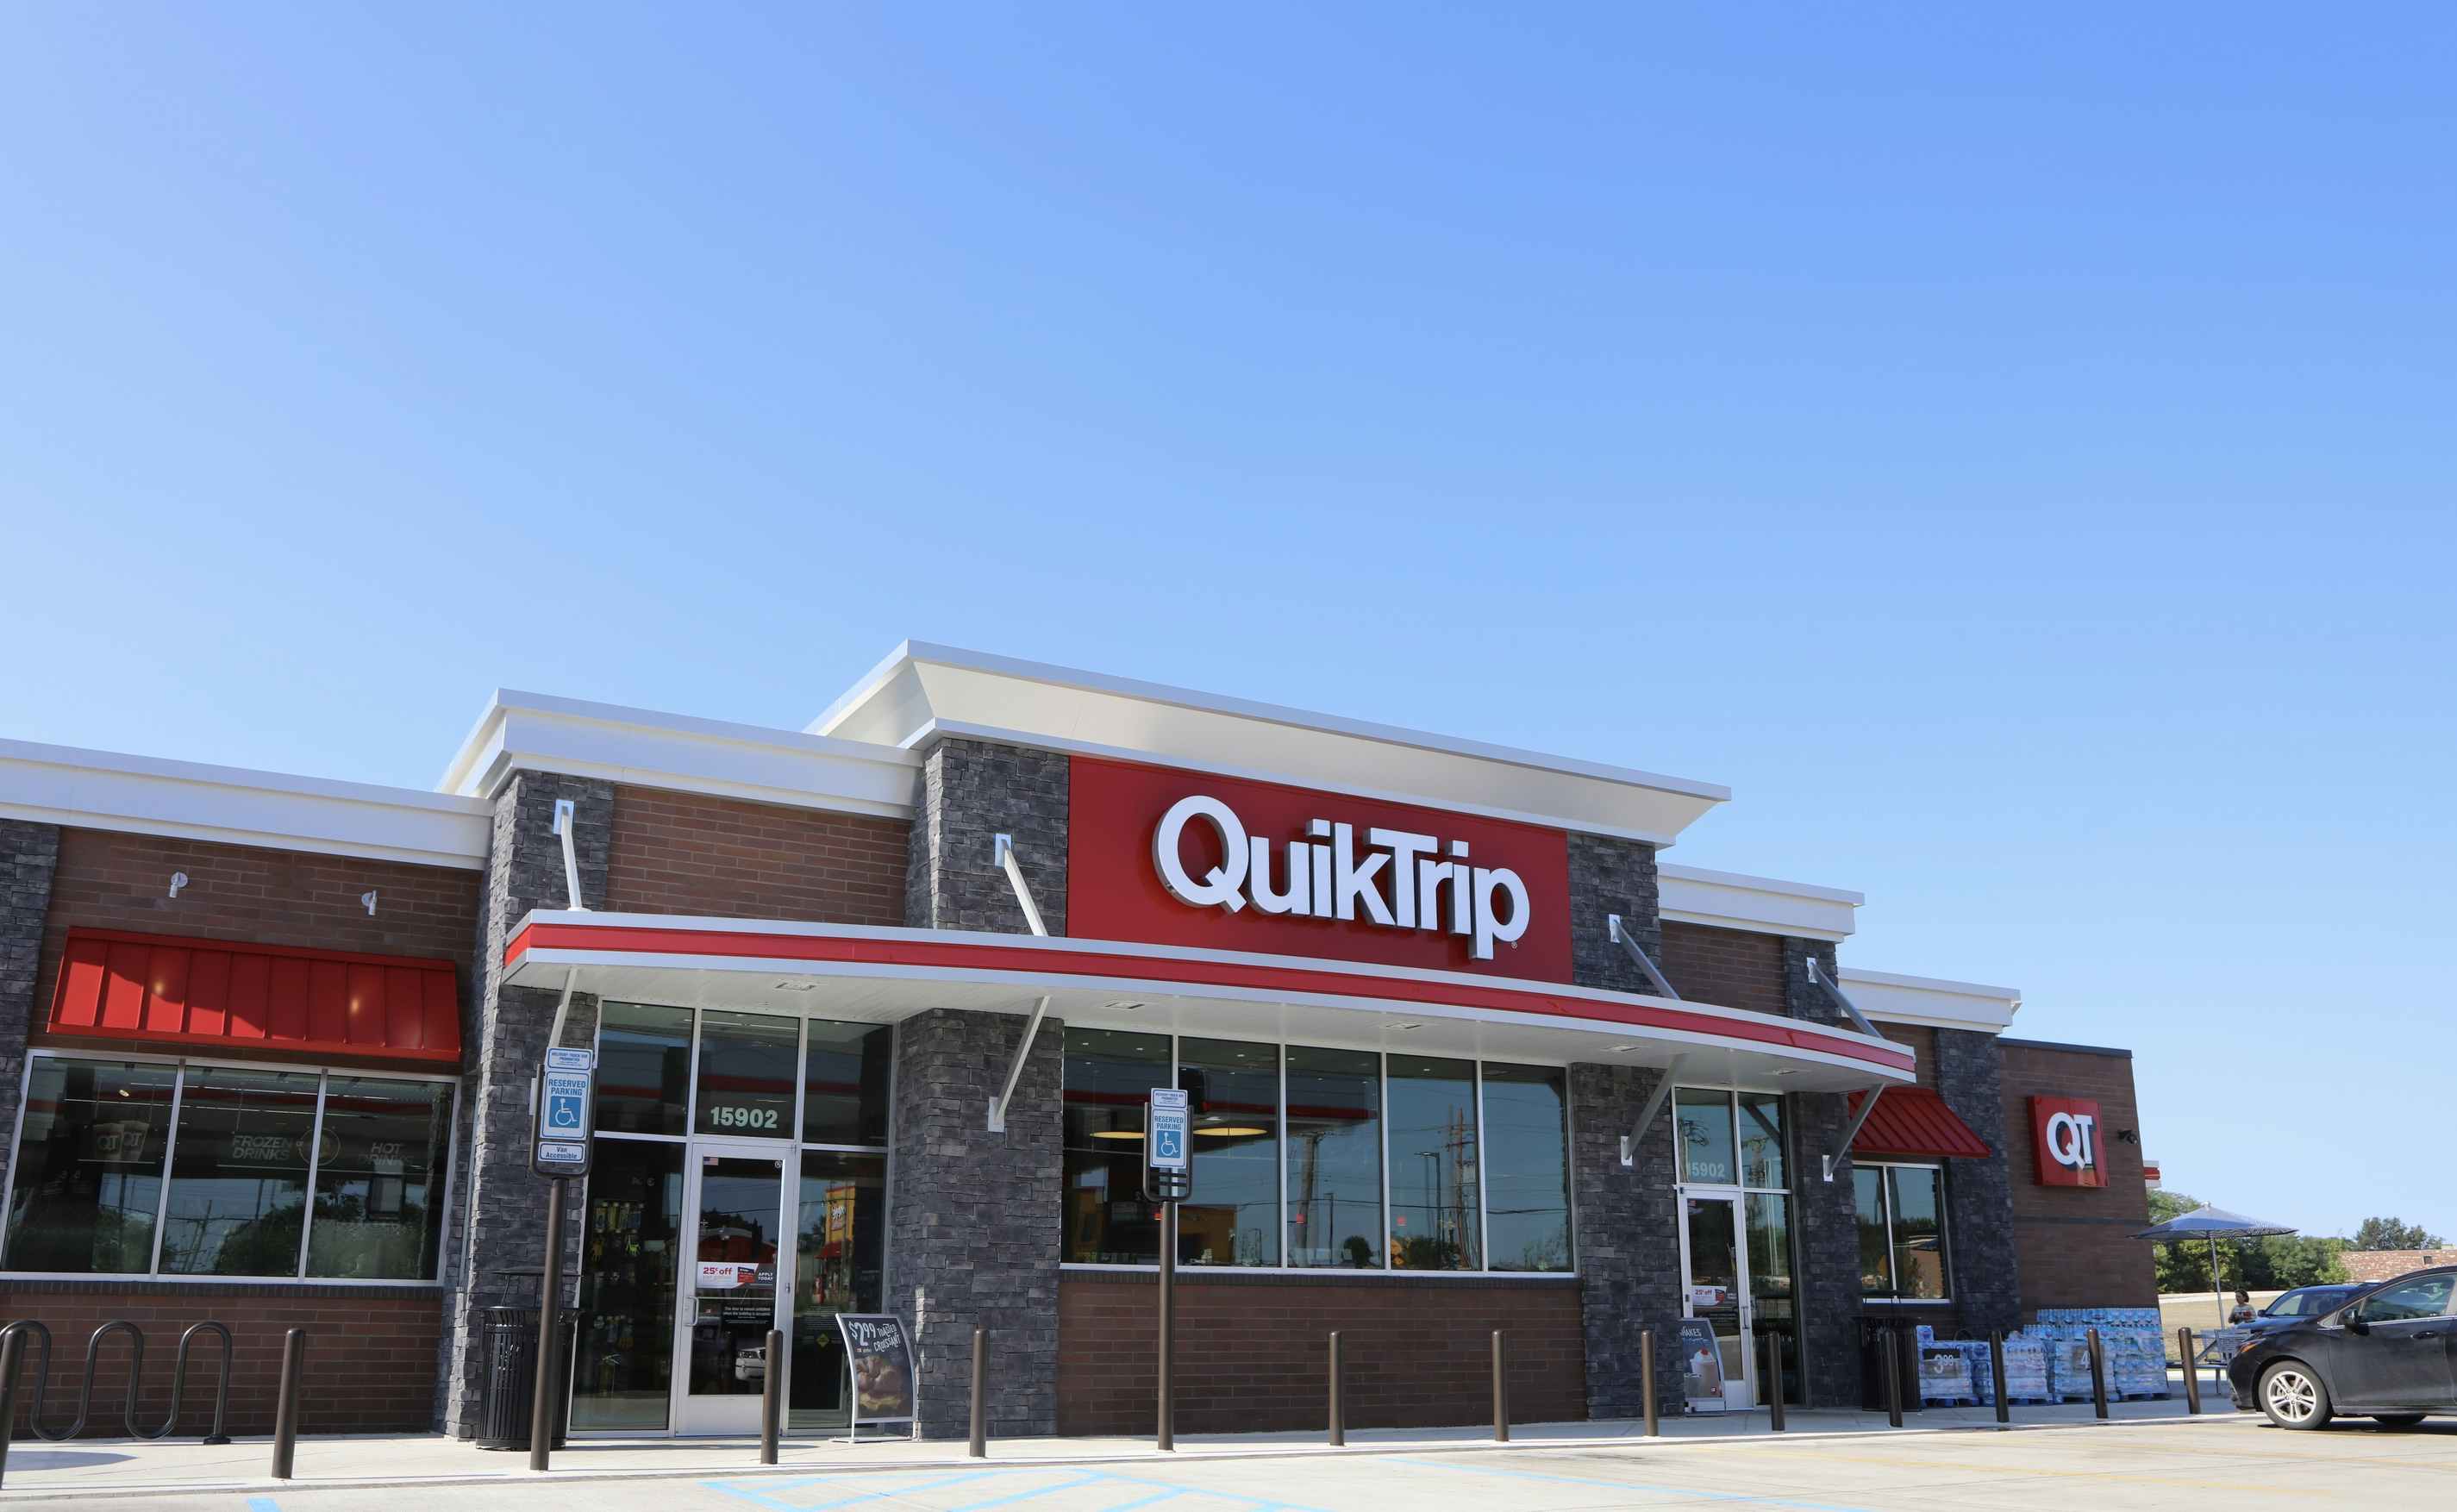 QuikTrip exterior pic from Dreamstime